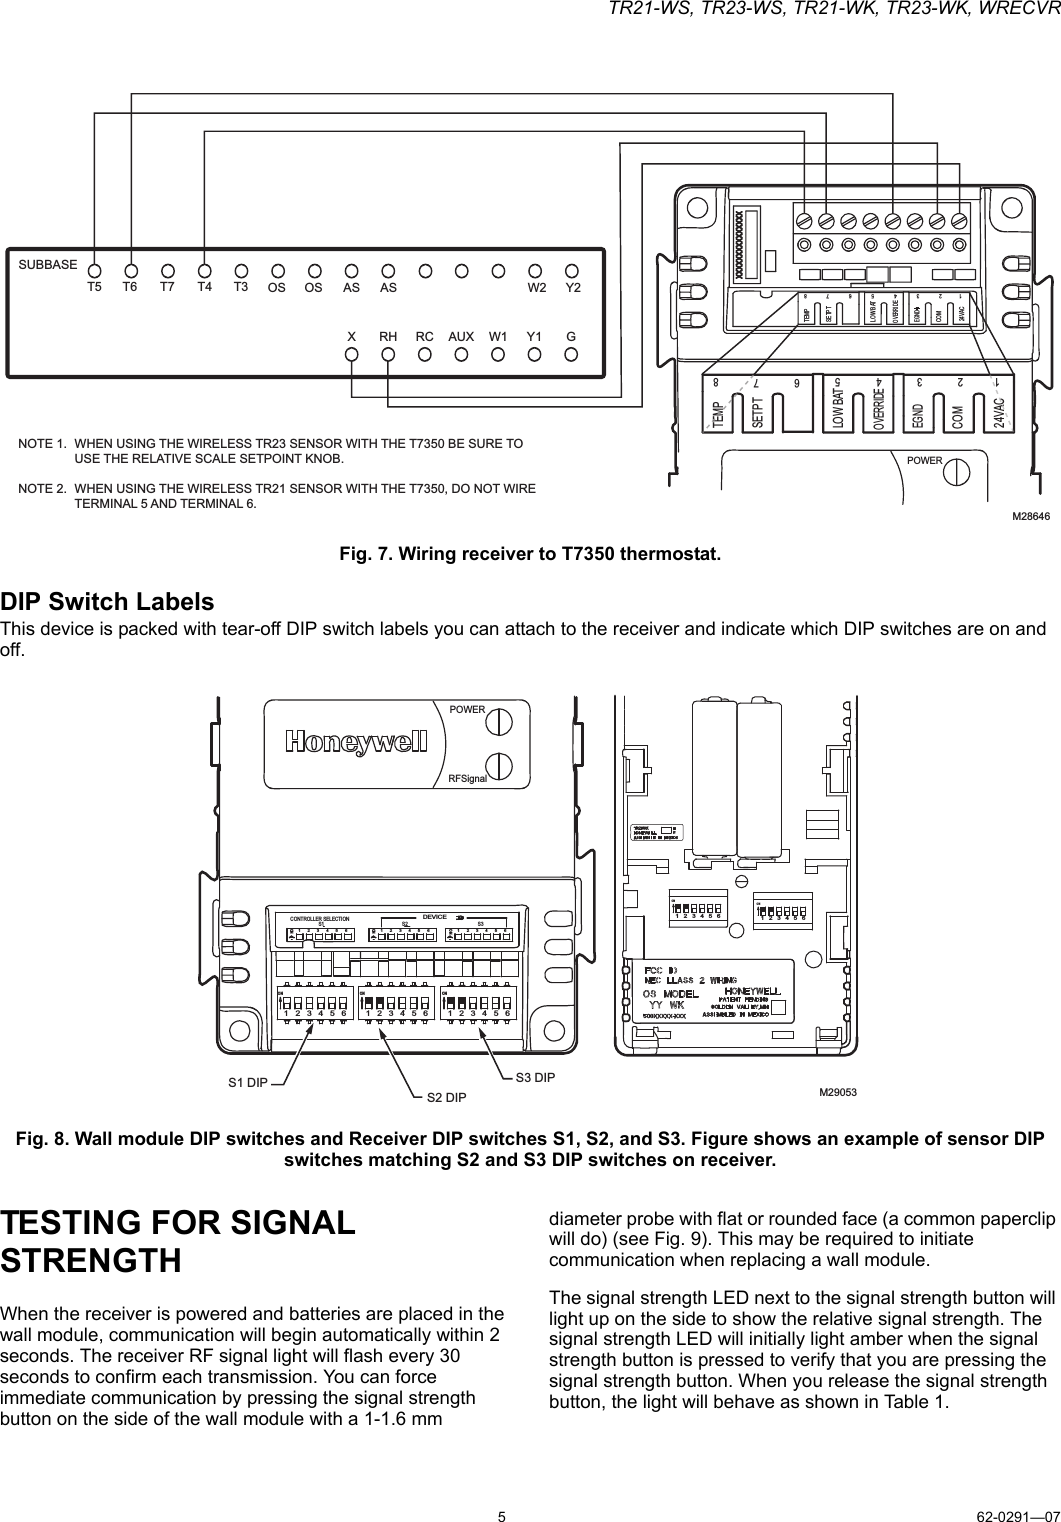 TR21-WS, TR23-WS, TR21-WK, TR23-WK, WRECVR562-0291—07Fig. 7. Wiring receiver to T7350 thermostat.DIP Switch LabelsThis device is packed with tear-off DIP switch labels you can attach to the receiver and indicate which DIP switches are on and off.Fig. 8. Wall module DIP switches and Receiver DIP switches S1, S2, and S3. Figure shows an example of sensor DIP switches matching S2 and S3 DIP switches on receiver.TESTING FOR SIGNAL STRENGTHWhen the receiver is powered and batteries are placed in the wall module, communication will begin automatically within 2 seconds. The receiver RF signal light will flash every 30 seconds to confirm each transmission. You can force immediate communication by pressing the signal strength button on the side of the wall module with a 1-1.6 mm diameter probe with flat or rounded face (a common paperclip will do) (see Fig. 9). This may be required to initiate communication when replacing a wall module.The signal strength LED next to the signal strength button will light up on the side to show the relative signal strength. The signal strength LED will initially light amber when the signal strength button is pressed to verify that you are pressing the signal strength button. When you release the signal strength button, the light will behave as shown in Table 1.M28646TEMPSETPTLOW BATOVERRIDECOM24VAC12345678POWEREGNDTEMPSETPTLOW BATOVERRIDECOM24VAC12345678EGNDEMACRCXSUBBASEW1 GY1W2 Y2AUXRHT5 T6 T7 T4 T3 OSOS ASASWHEN USING THE WIRELESS TR23 SENSOR WITH THE T7350 BE SURE TO USE THE RELATIVE SCALE SETPOINT KNOB.WHEN USING THE WIRELESS TR21 SENSOR WITH THE T7350, DO NOT WIRE TERMINAL 5 AND TERMINAL 6.NOTE 1.NOTE 2.S1 DIPS2 DIPS3 DIPM29053POWERRFSignalON ON ONCONTROLLER SELECTIONS1 S2 S3DEVICE1    2    3    4    5    6 1    2    3    4    5    61    2    3    4    5    61  2  3  4  5  61  2  3  4  5  61  2  3  4  5  6ONONONON1  2  3  4  5  6ON1  2  3  4  5  6